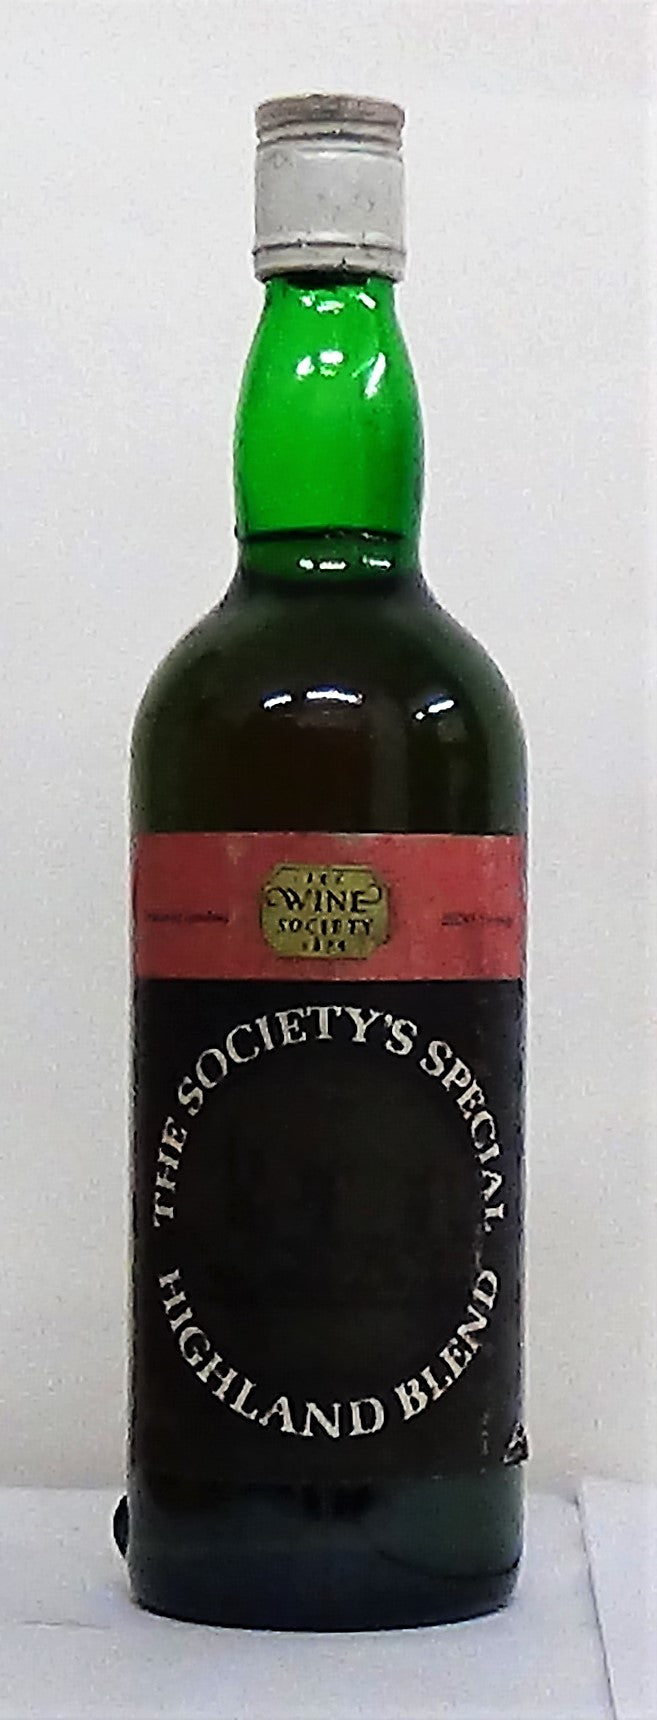 1960’s The Society's Finest Special Highland Blend North British Disti